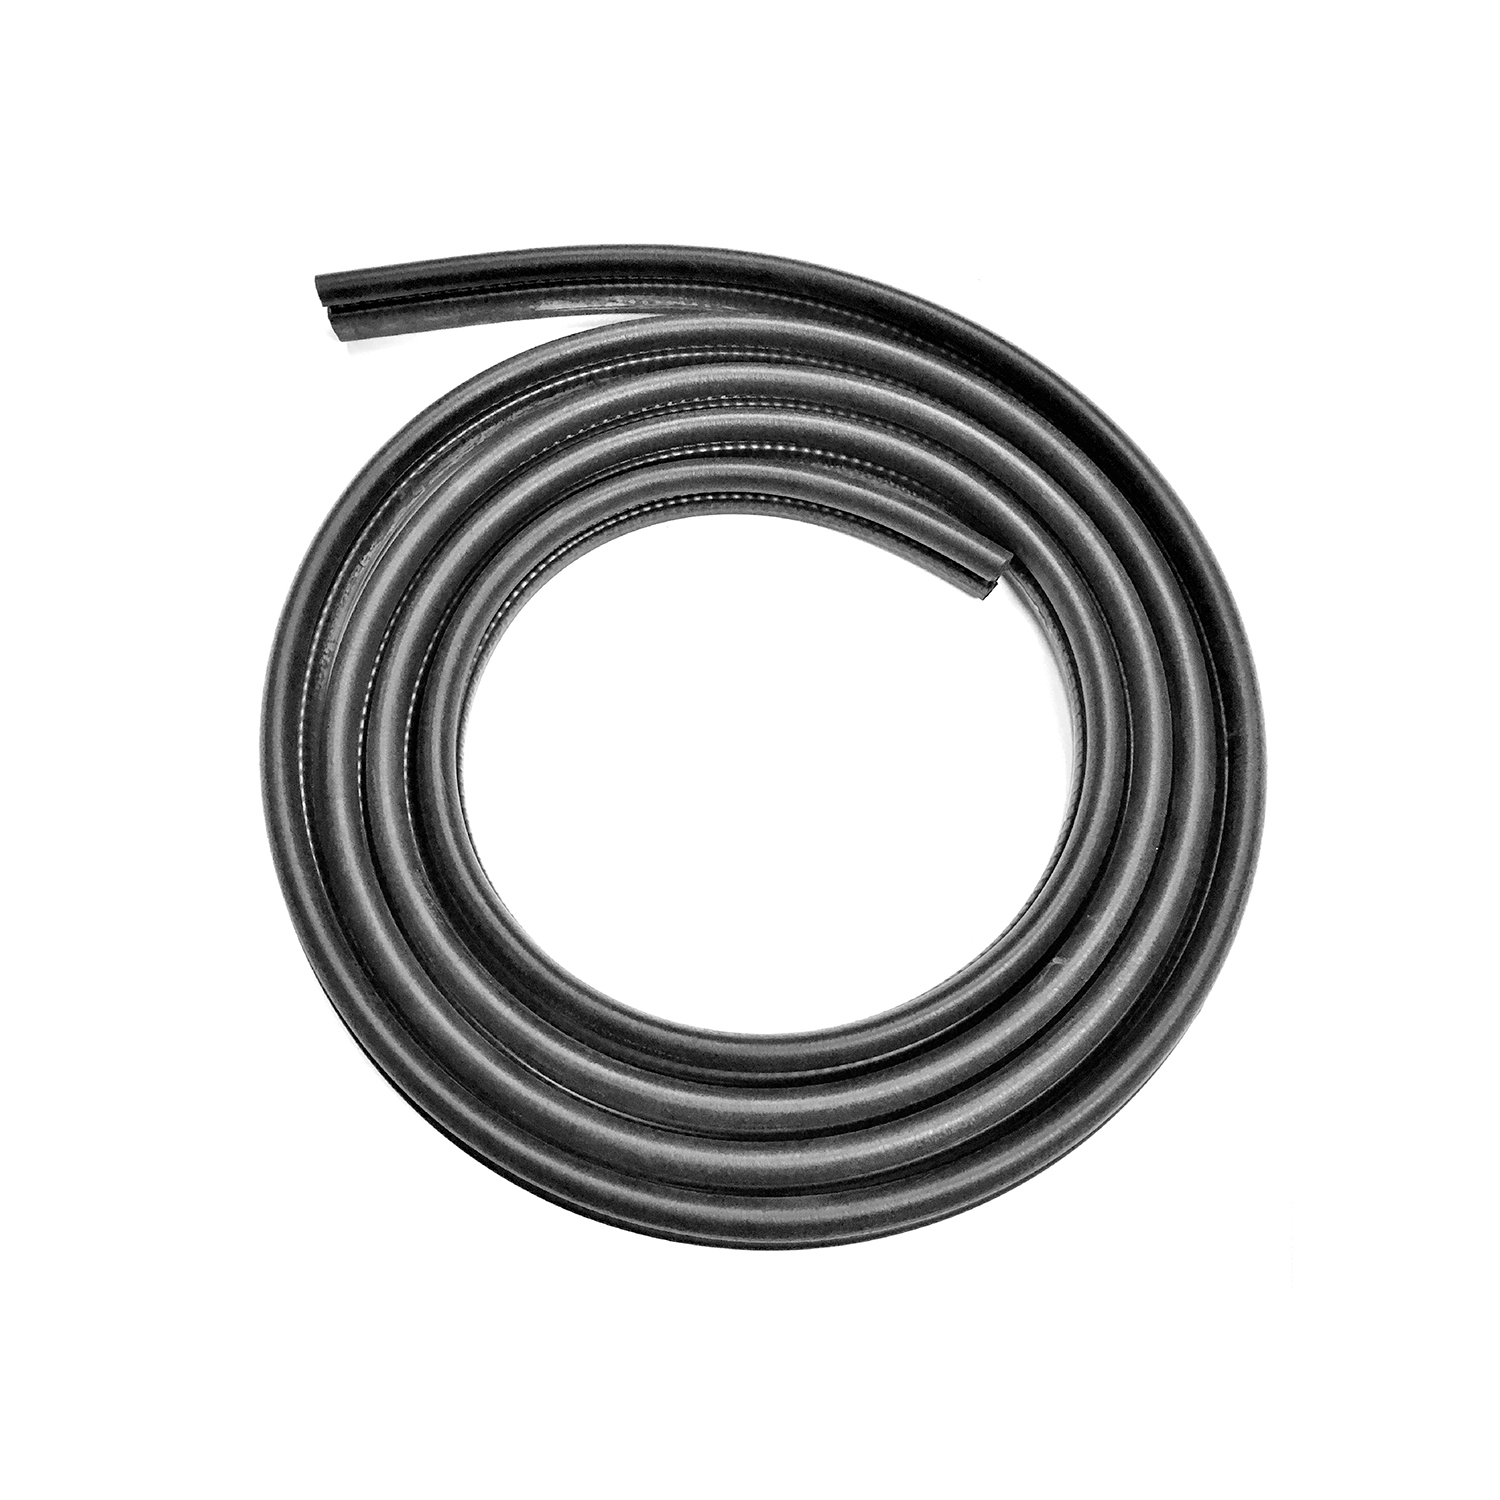 2006 Ford E-350 Super Duty Door seal, '04-'14 Ford E-Series full size van models, fits front left or right-LM 110-VH